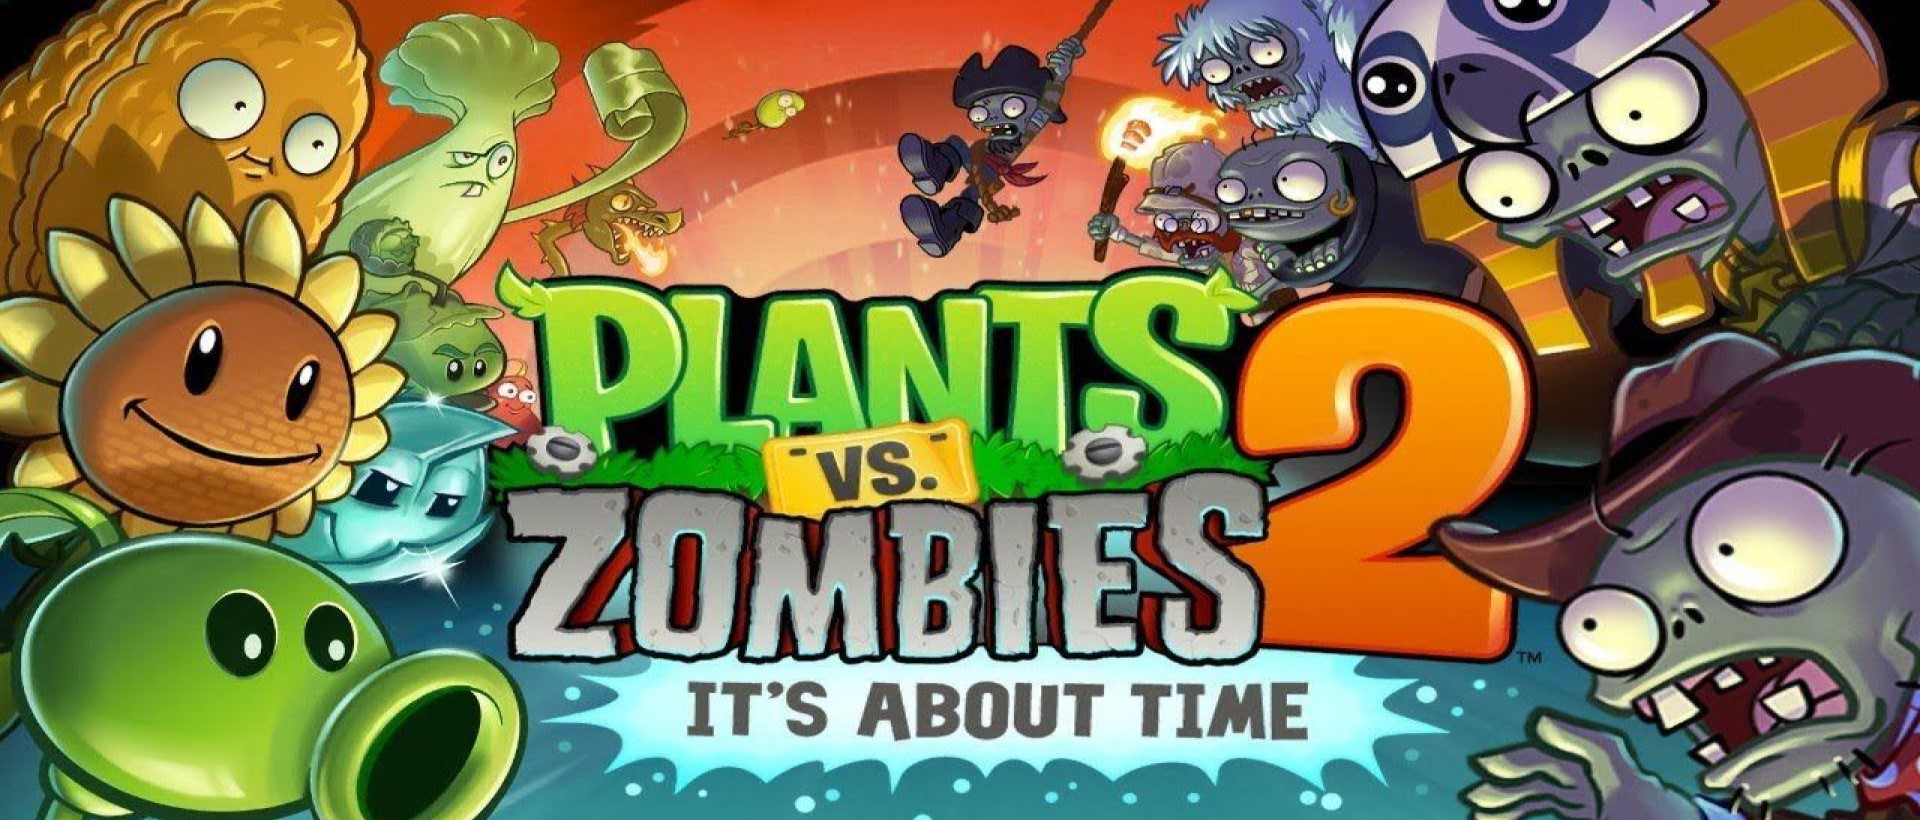 Can I Play Plants Vs Zombies 2 Offline?